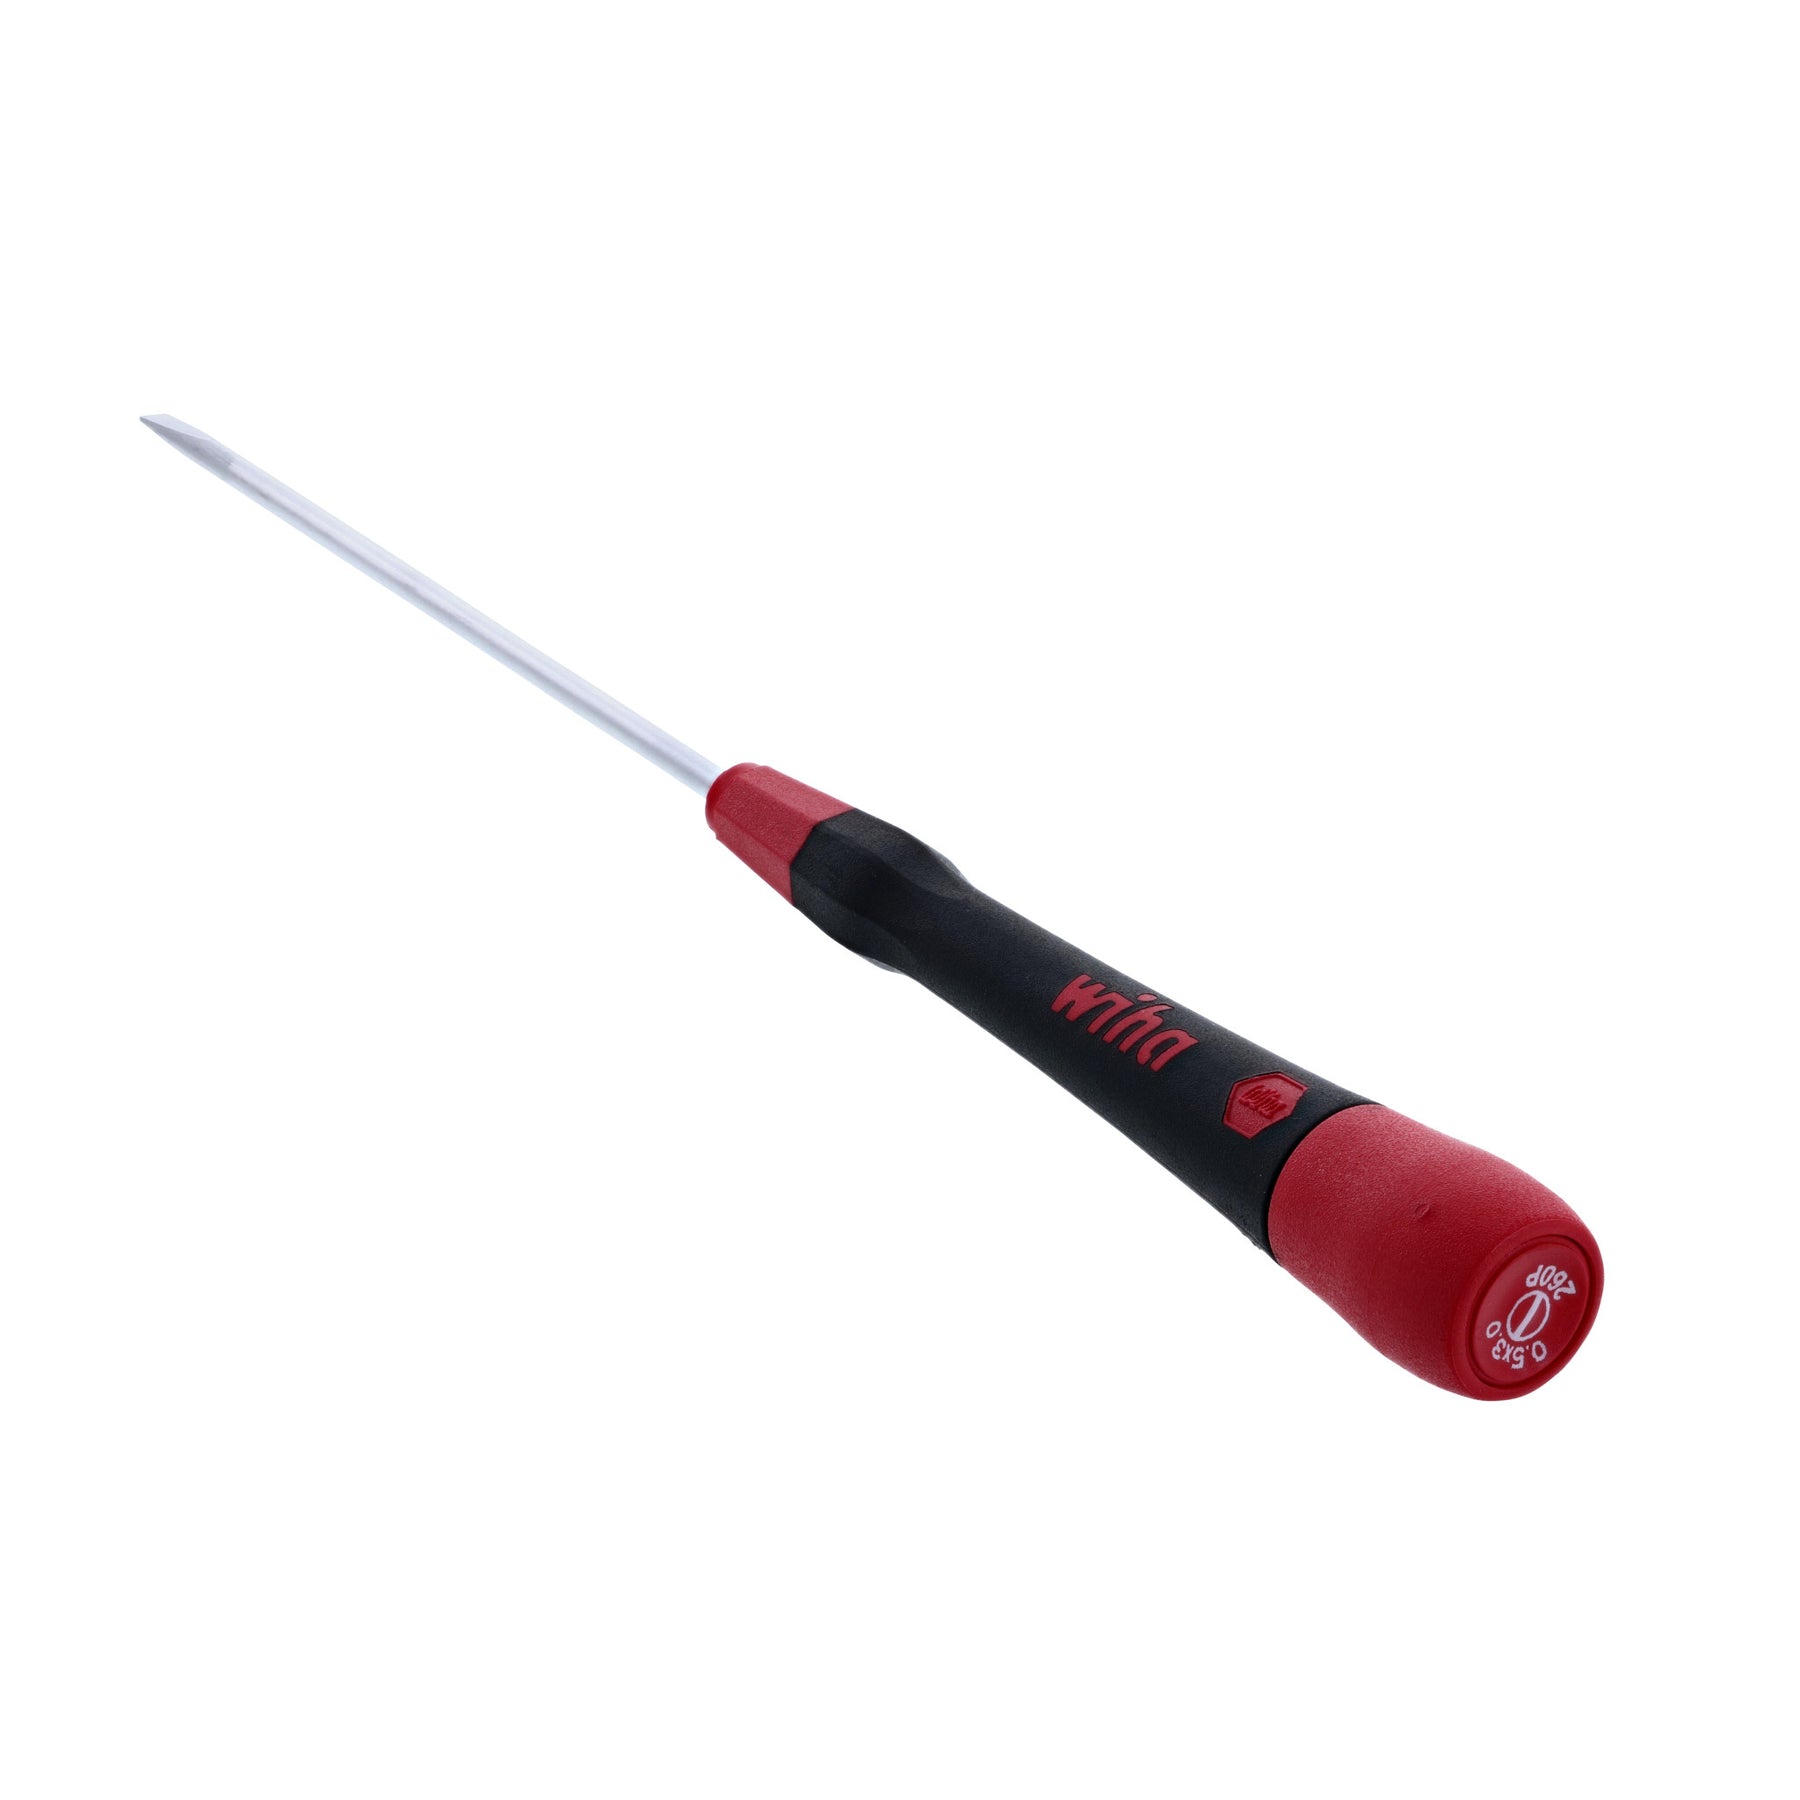 PicoFinish Slotted Screwdriver 3.0mm x 100mm